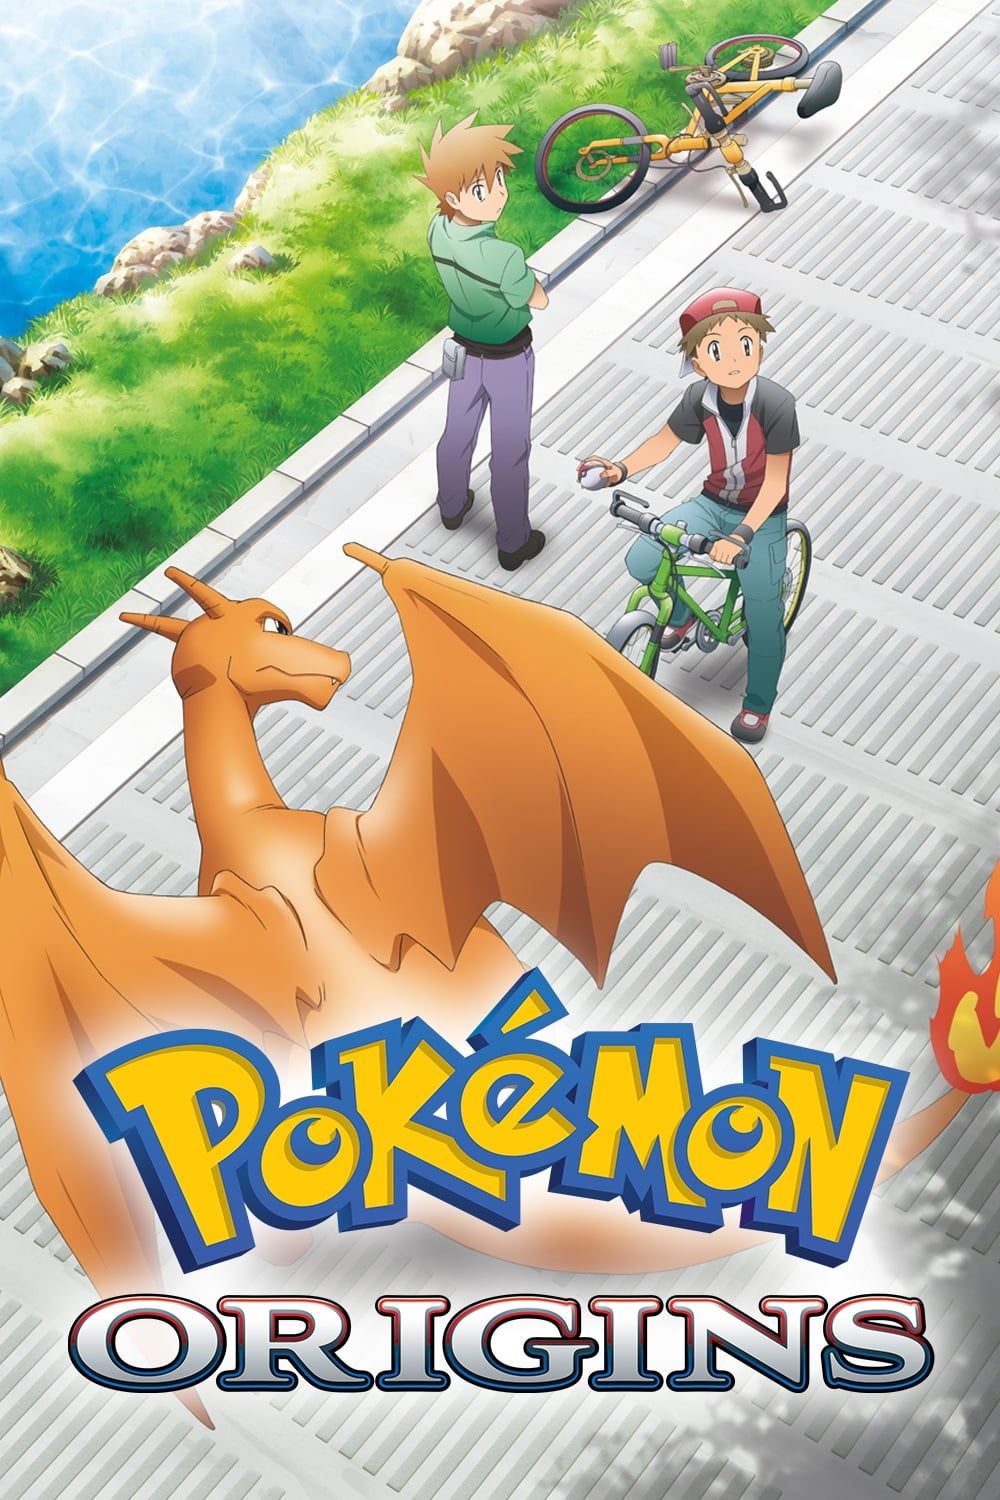 Watch The First Episode Of Pokémon Origins Anime Online - Game